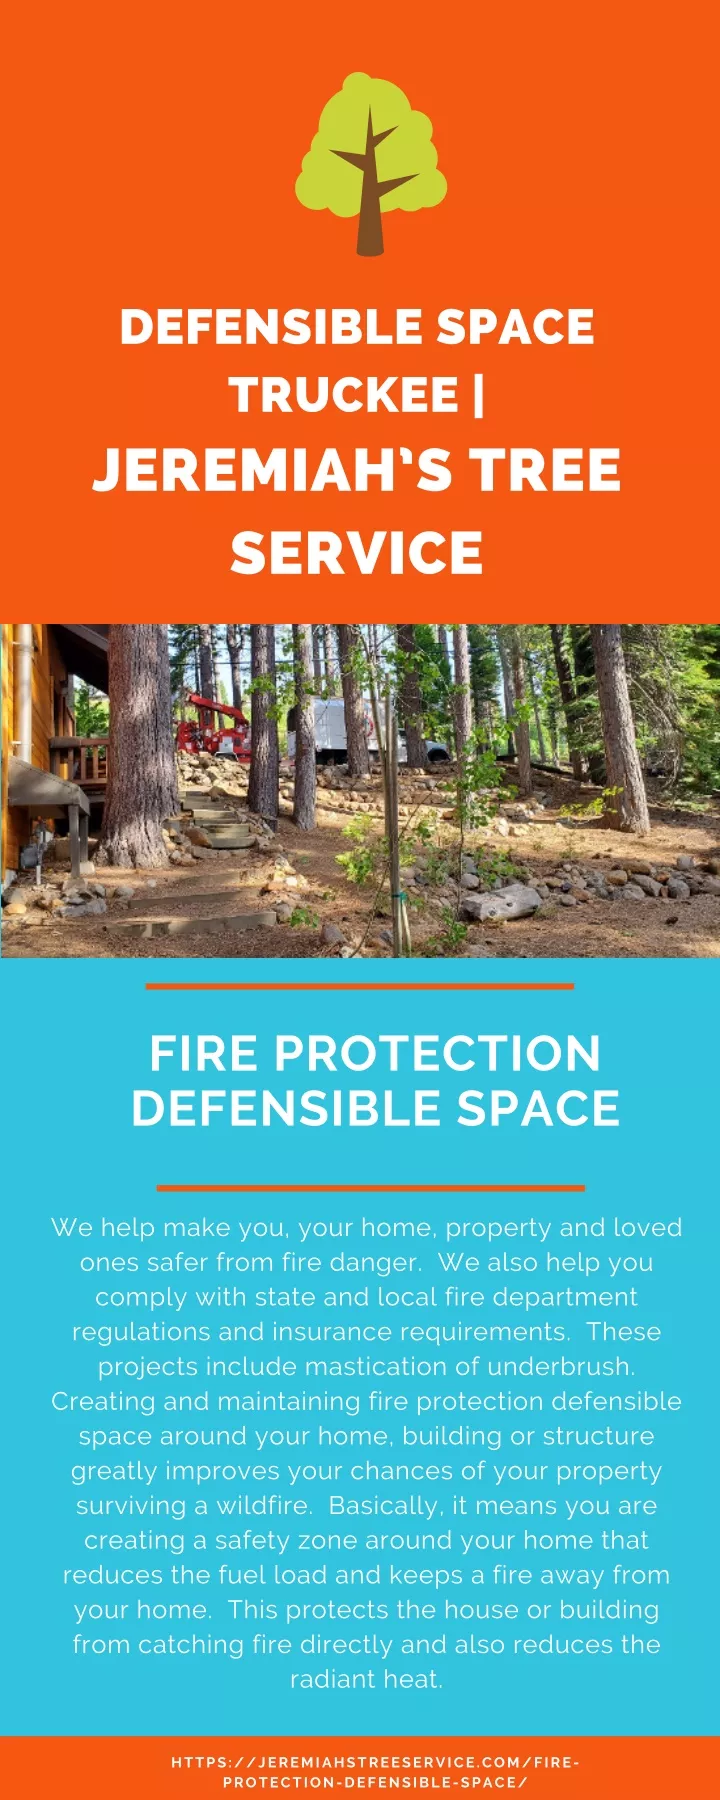 defensible space truckee jeremiah s tree service